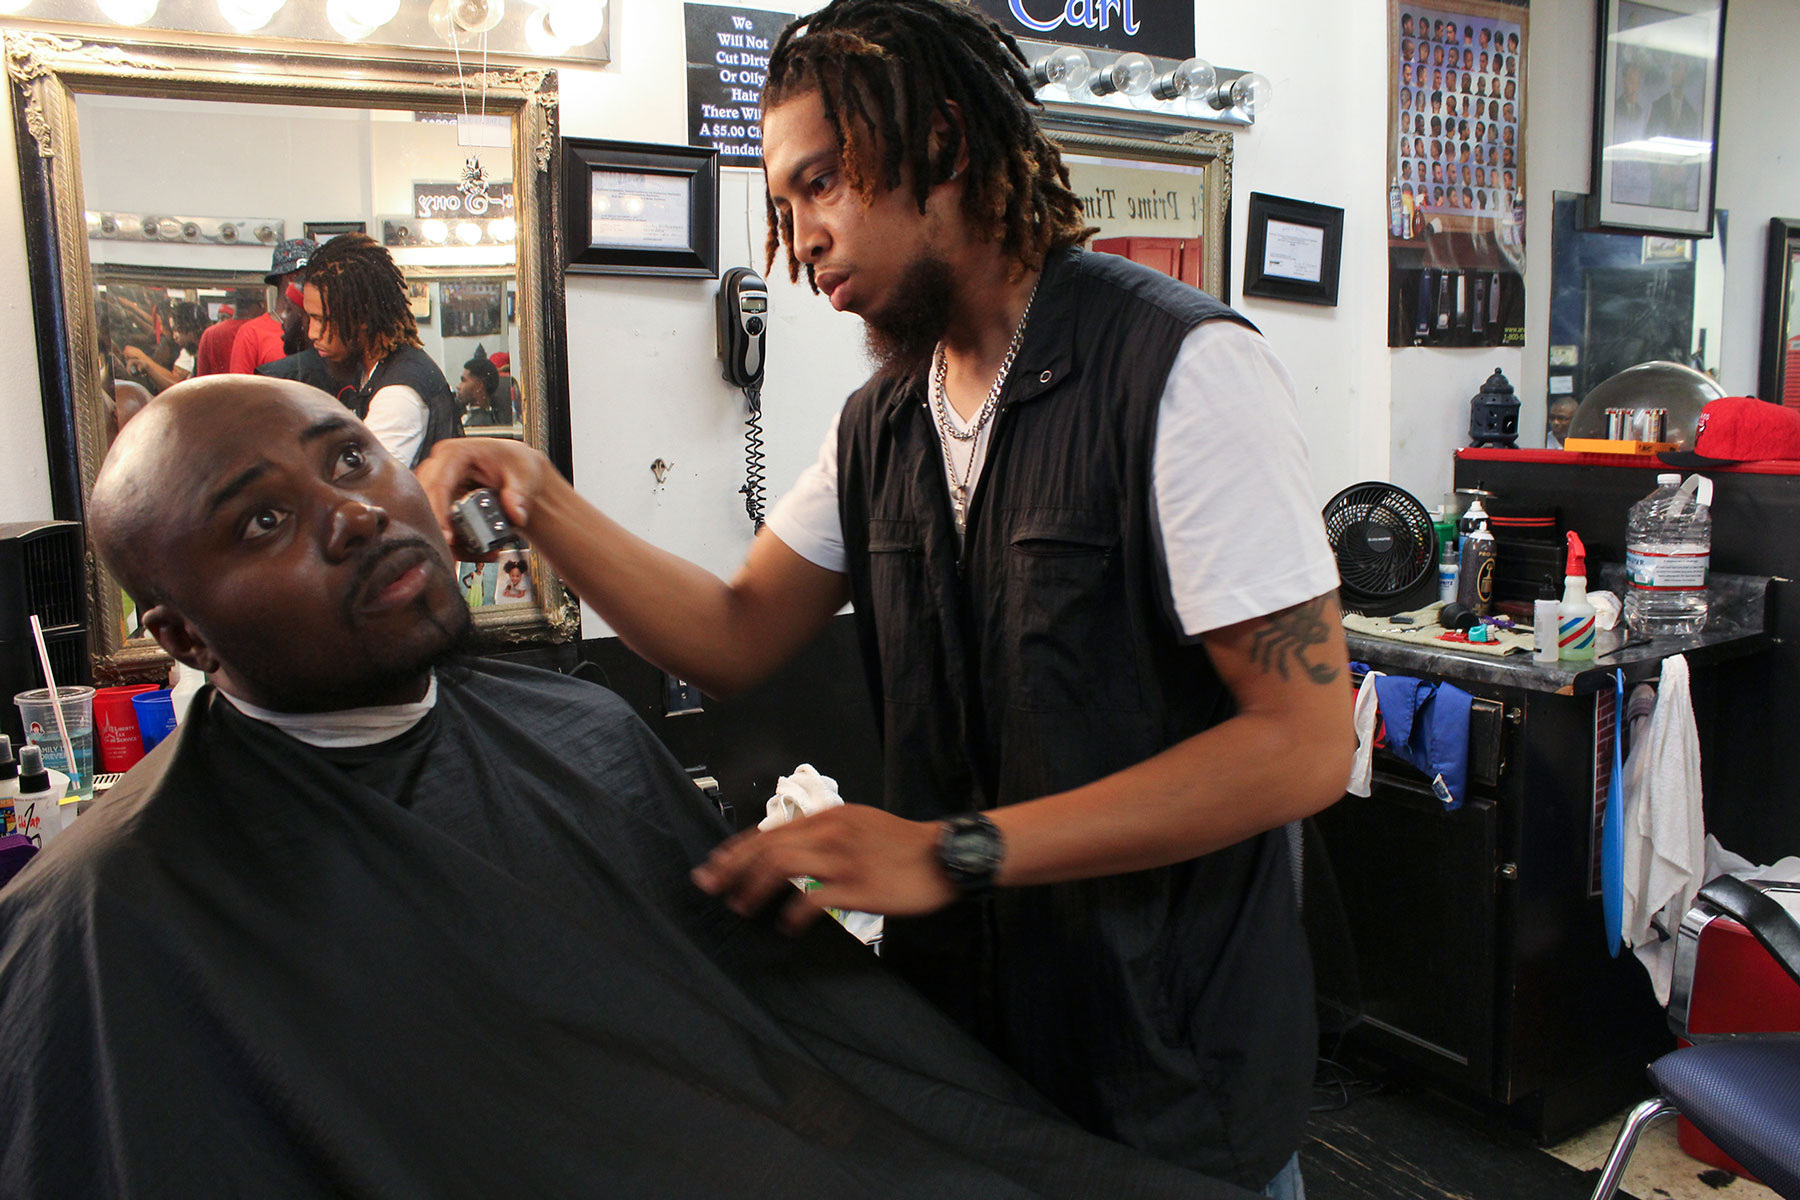 Prime Time Barbershop is the place where Michael Brown used to get his hair cut. Brandon Turner, shown here, worked at the barbershop when Brown’s death happened. He still believes the city needs to do better on police relations. (Phillip Jackson/News21)